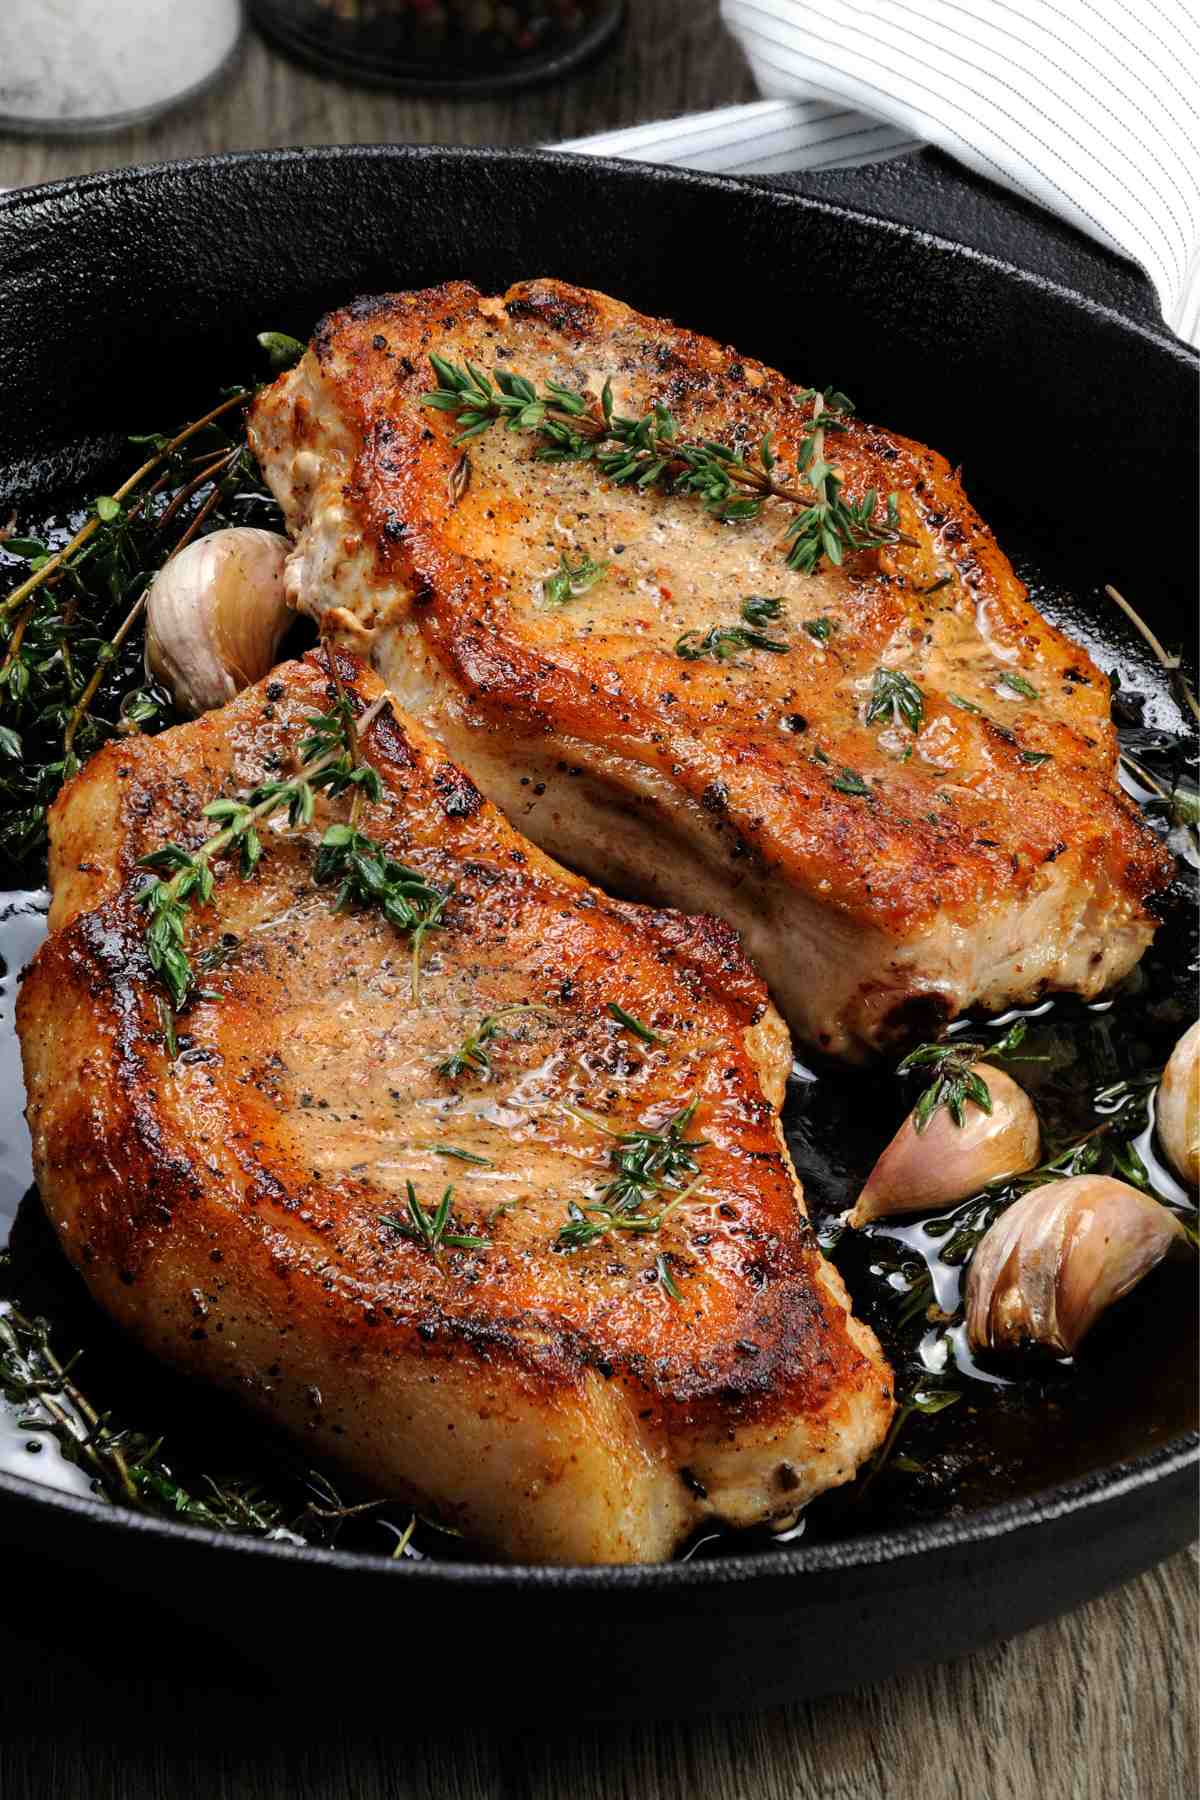 What’s the best temp to cook pork chops? Properly cooked pork chops are tender, juicy, and full of flavors, while overcooked pork is chewy and dry. From cooking temperature to internal temperature, we got you covered.